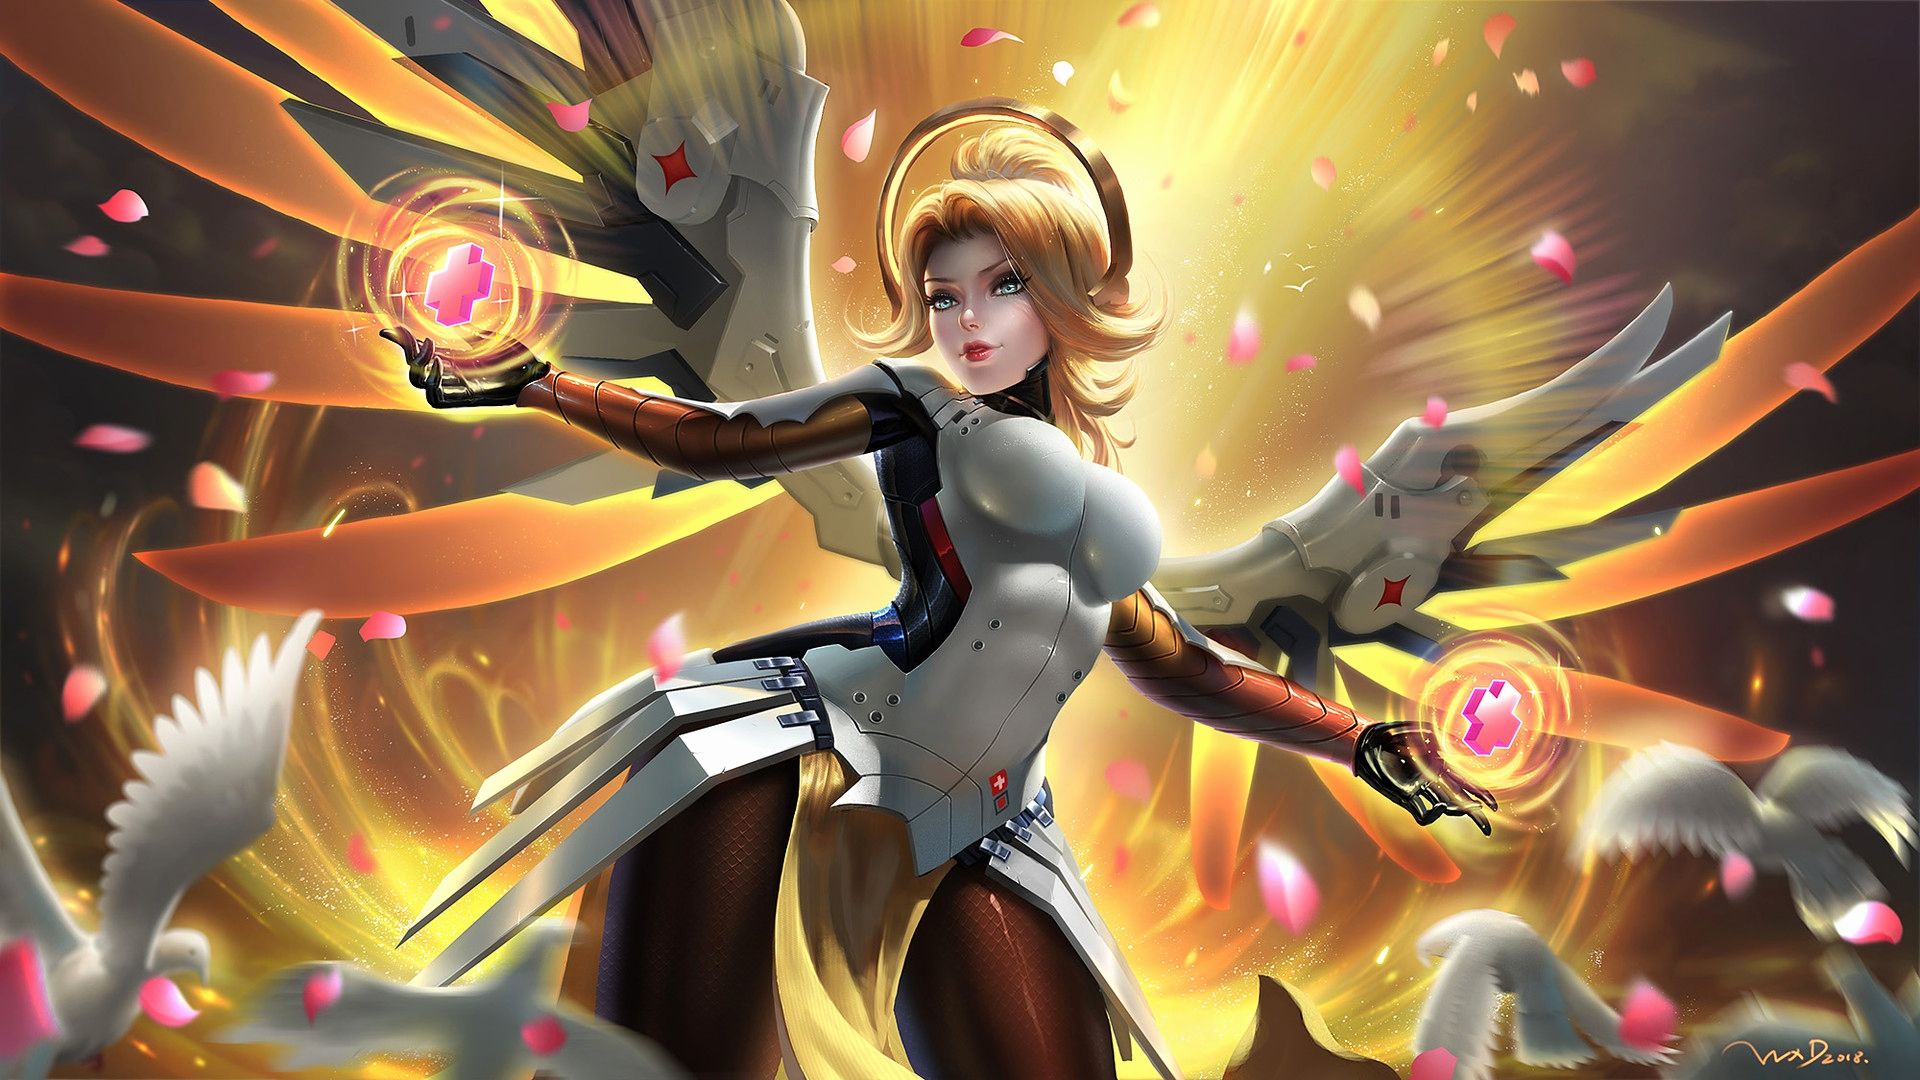 Mercy Overwatch Wallpaper Awesome Overwatch Wallpaper This Year of The Hudson